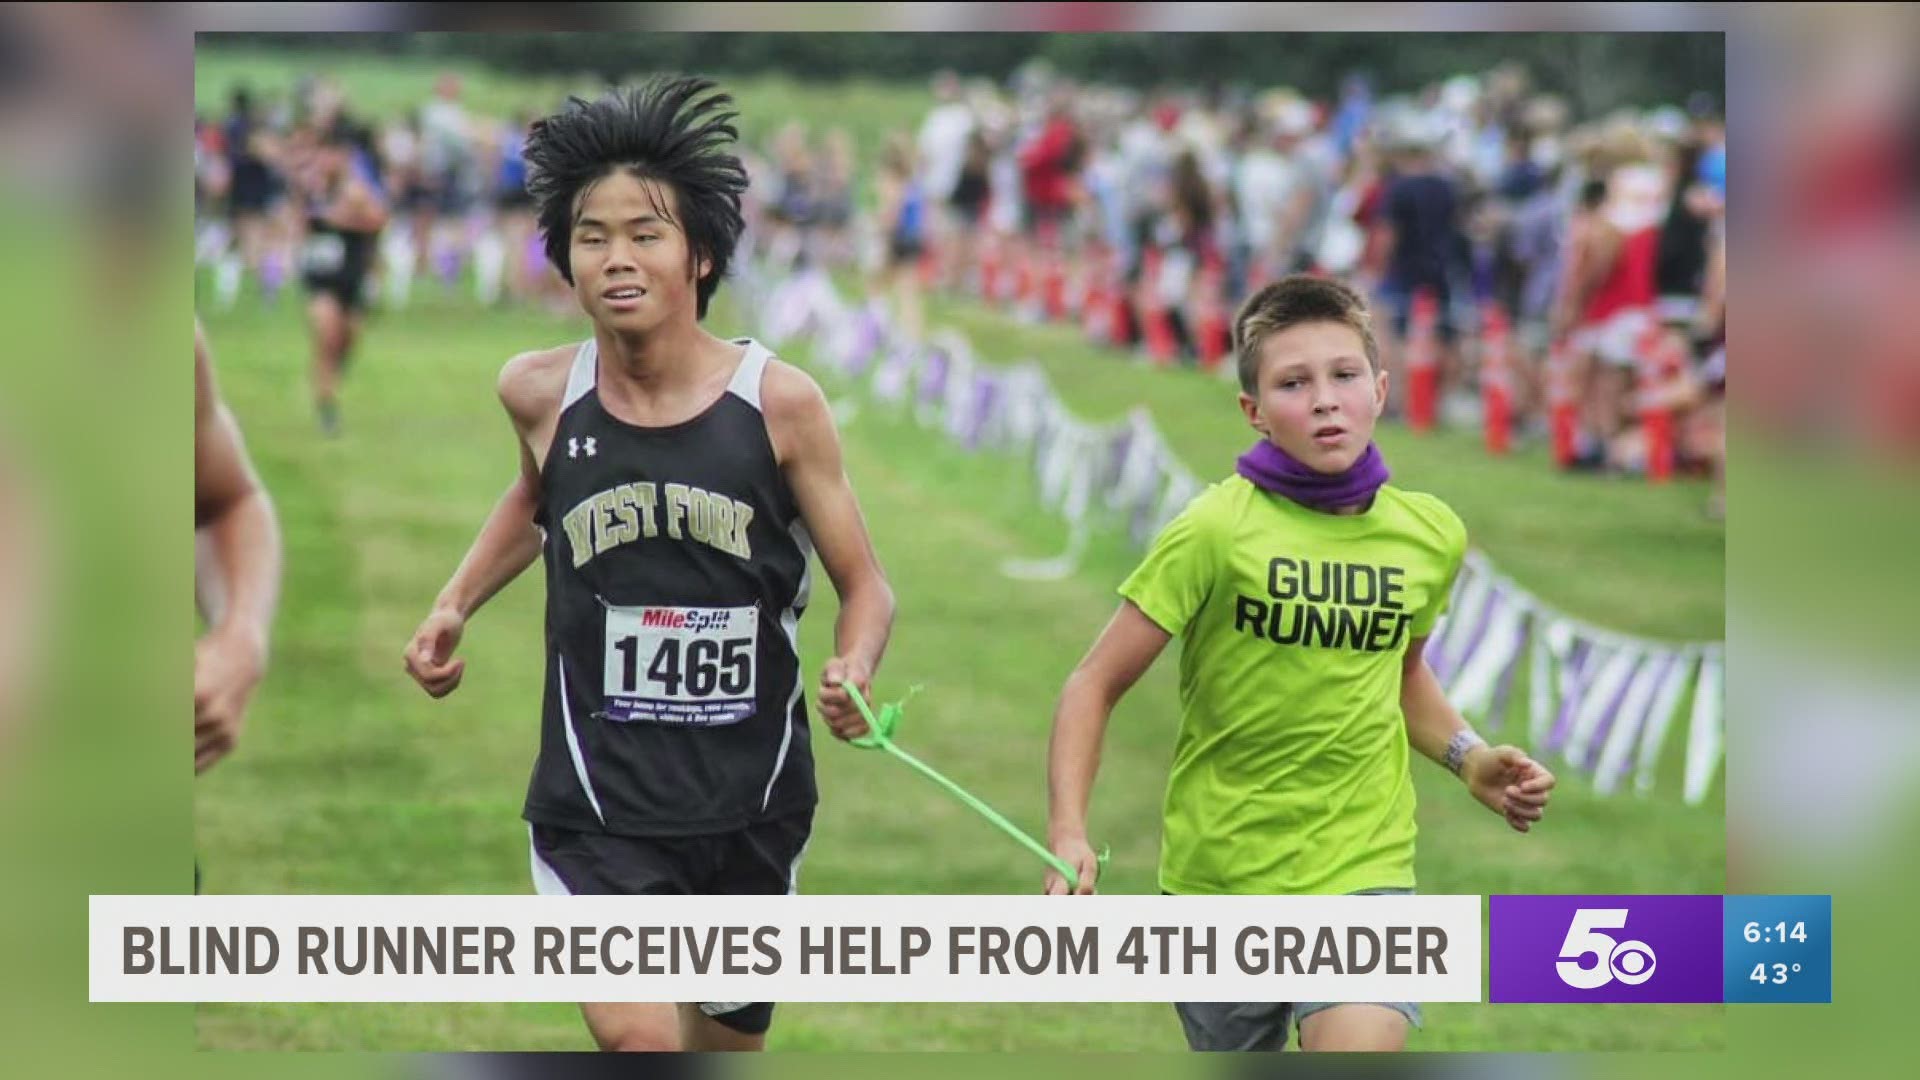 West Fork freshman Paul Scott and Fayetteville fourth-grader Rebel Hays have been running cross country together as a team this season.